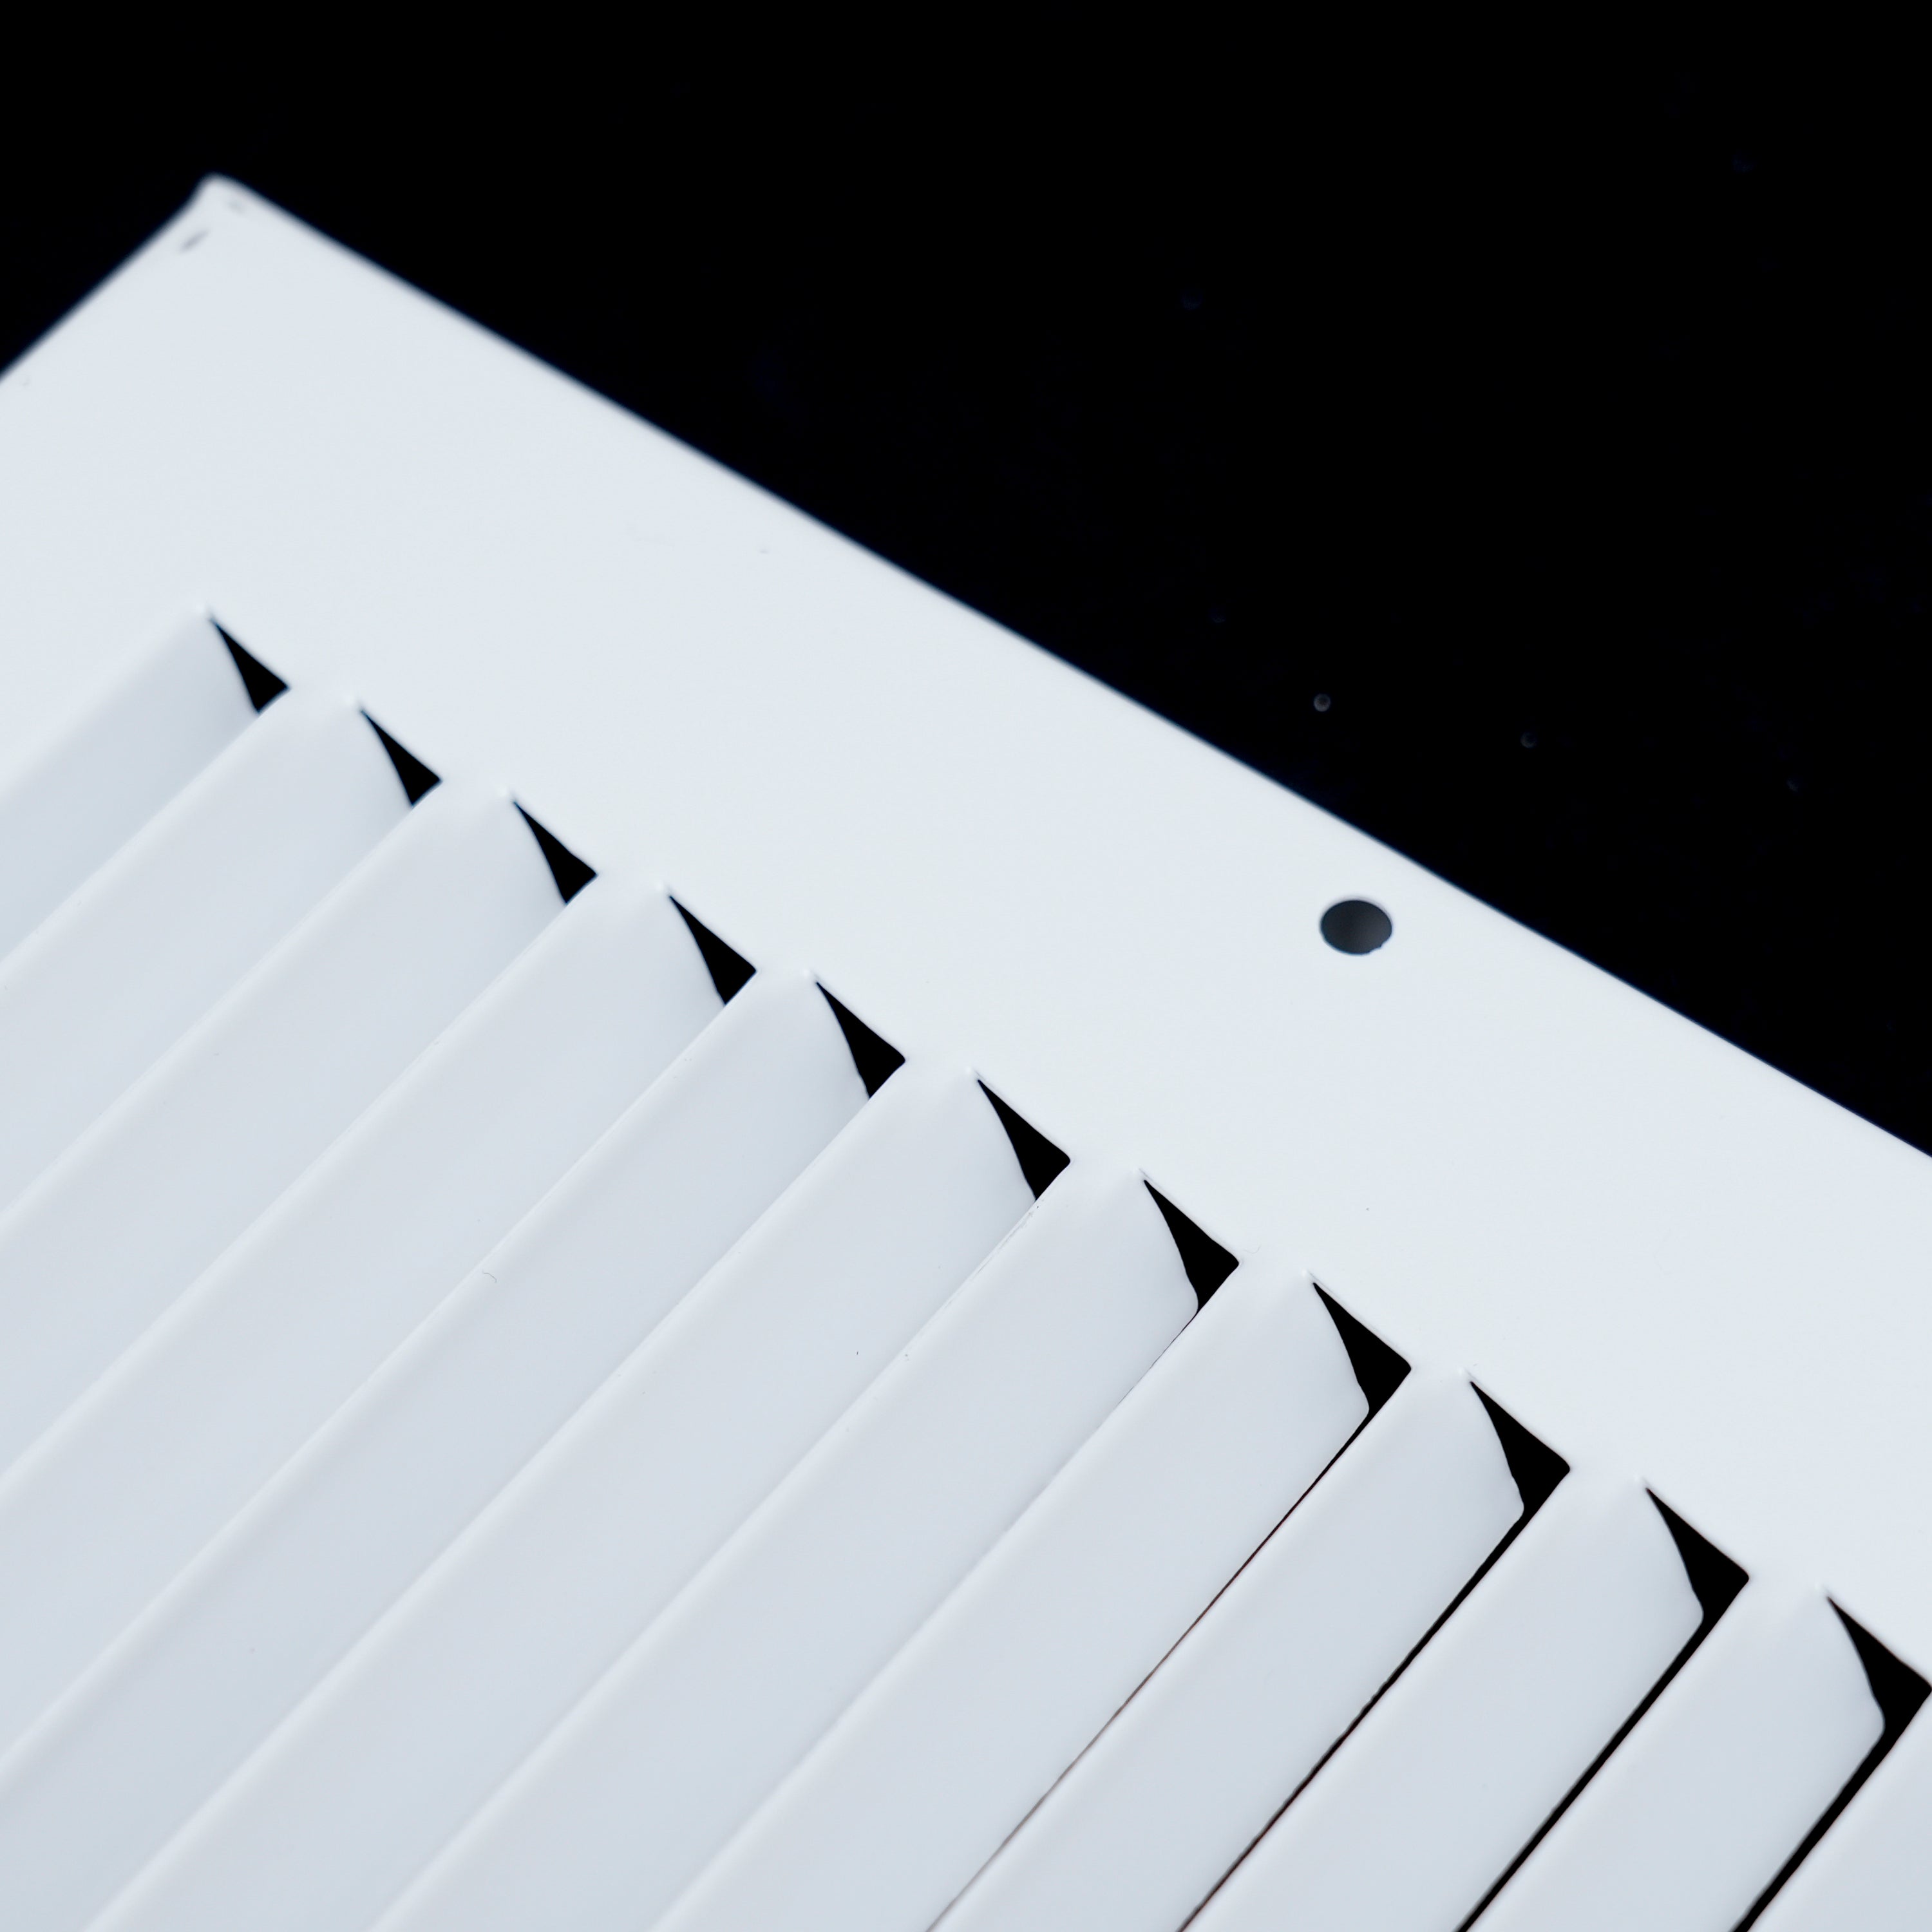 12"W x 4"H  Baseboard Return Air Grille | Vent Cover Grill | 7/8" Margin Turnback to Fit Baseboard | White | Outer Dimensions: 13.75"W X 5.75"H for 12x4 Duct Opening